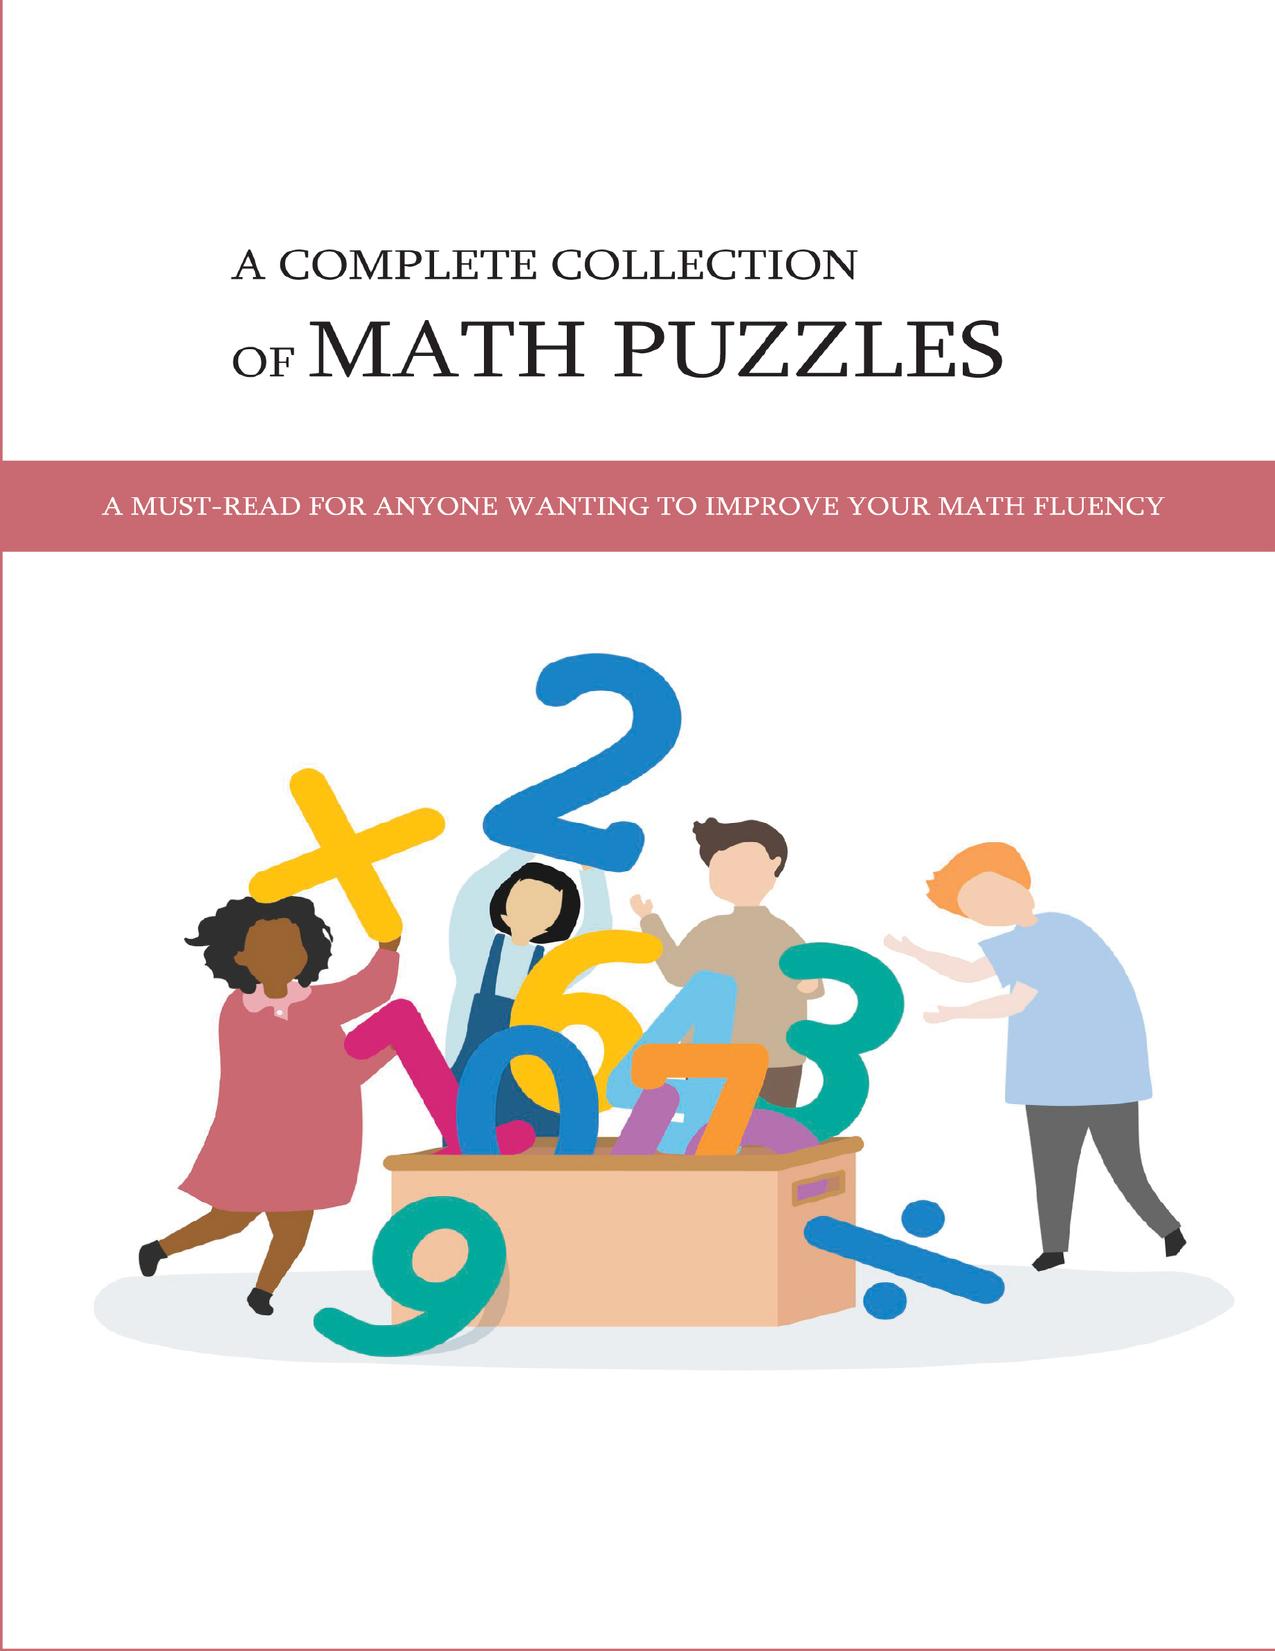 A Complete Collection Of Math Puzzles: A Must-Read For Anyone Wanting To Improve Your Math Fluency: Math Puzzle Books For Adults by Yamazaki Percy